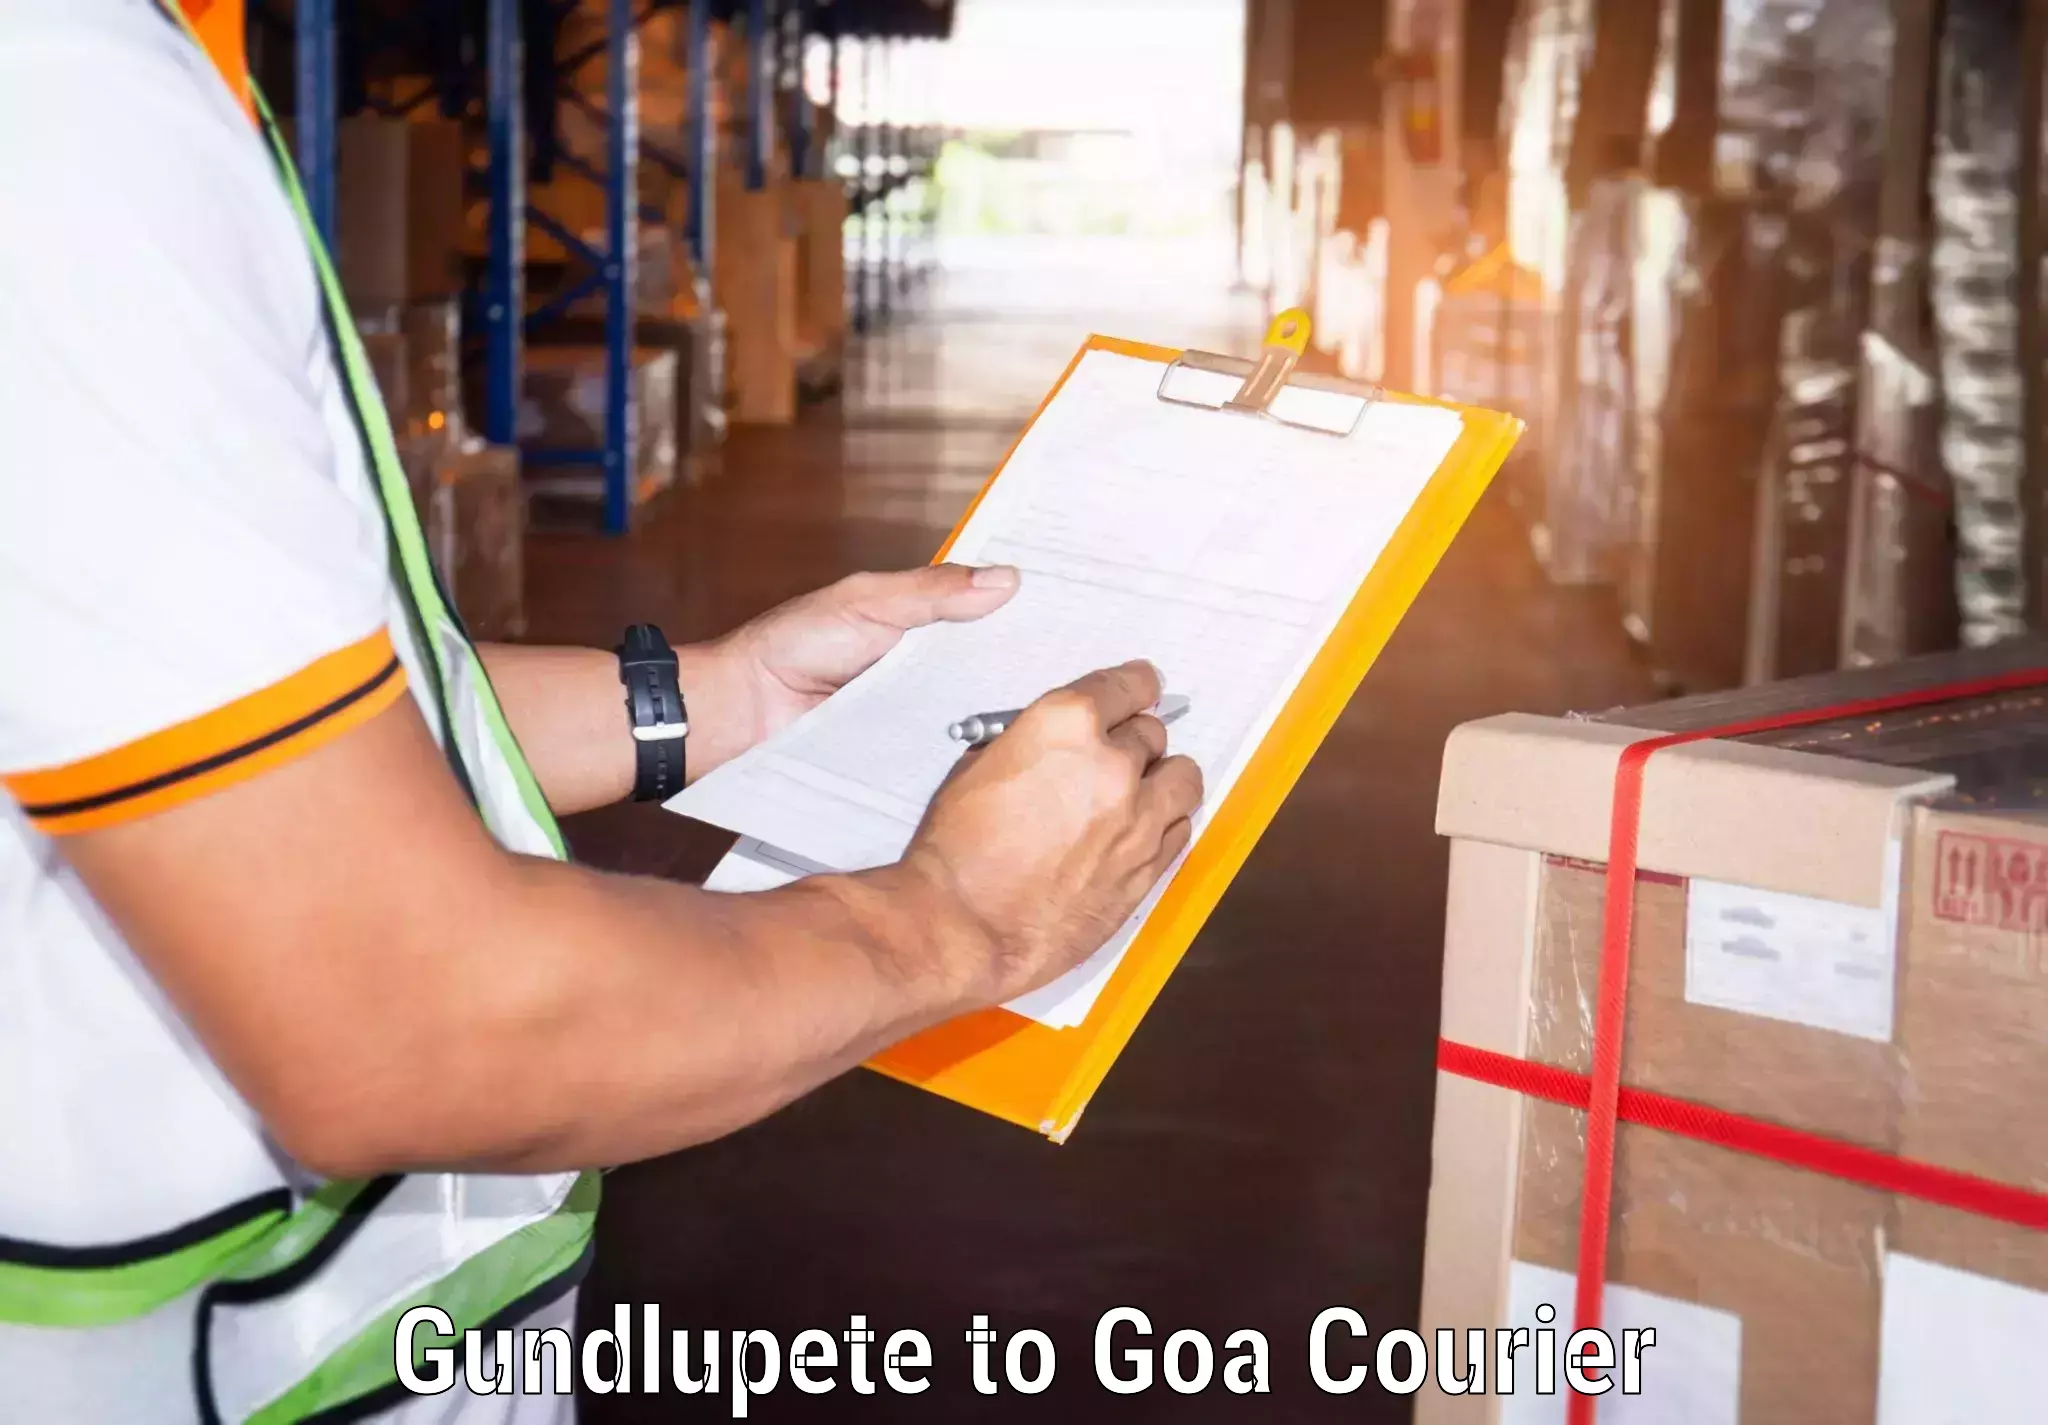 Global shipping networks Gundlupete to South Goa